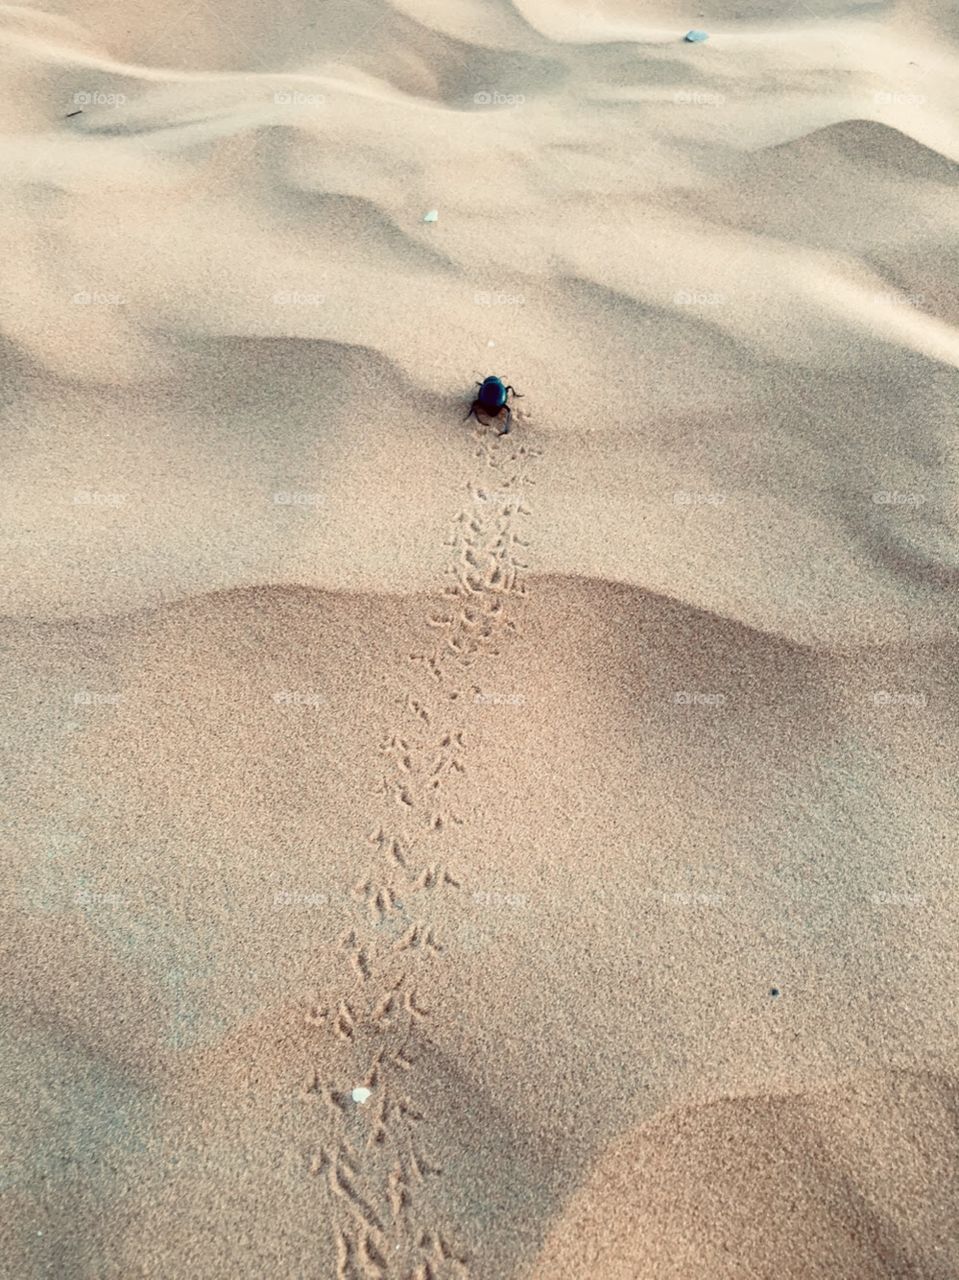 I followed this little scarab for a while just mesmerized by its little footprint and cute dance in te Sahara desert 